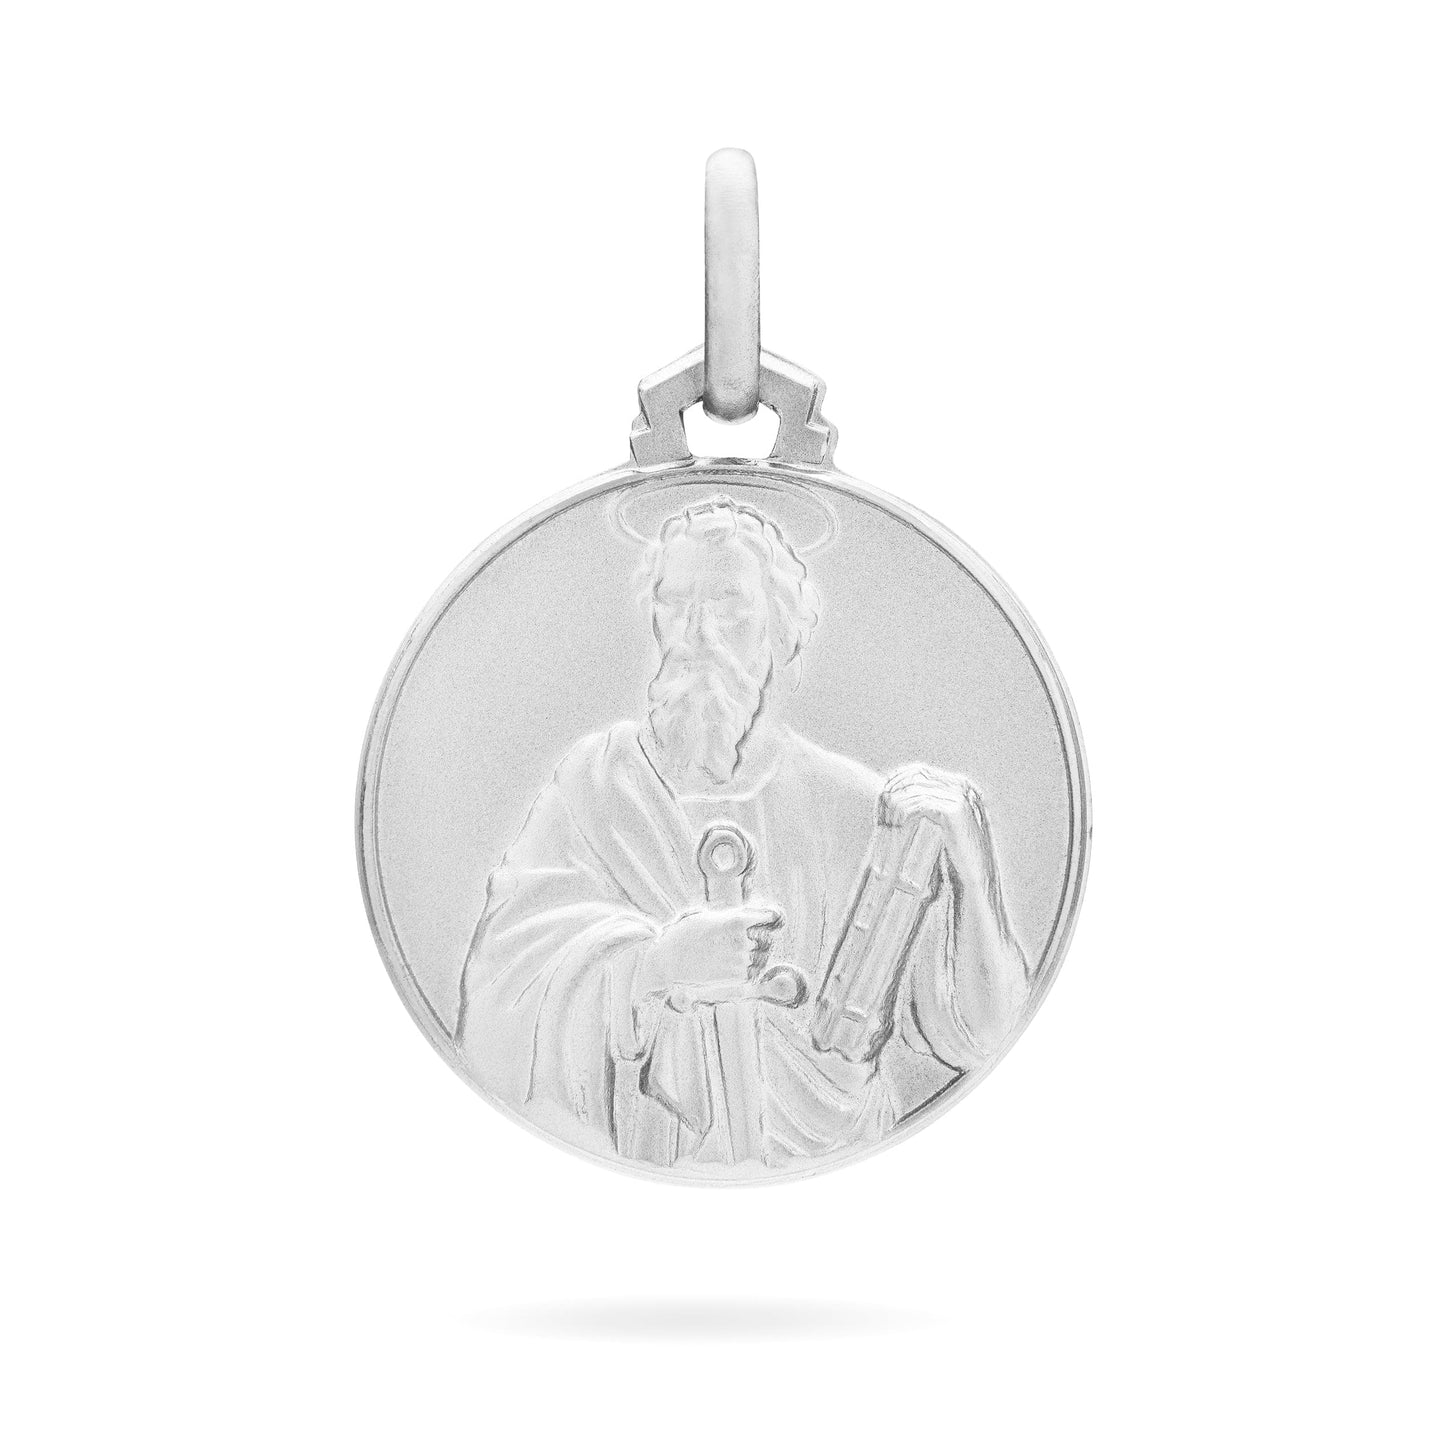 MONDO CATTOLICO Medal Silver medal of Saint Paul